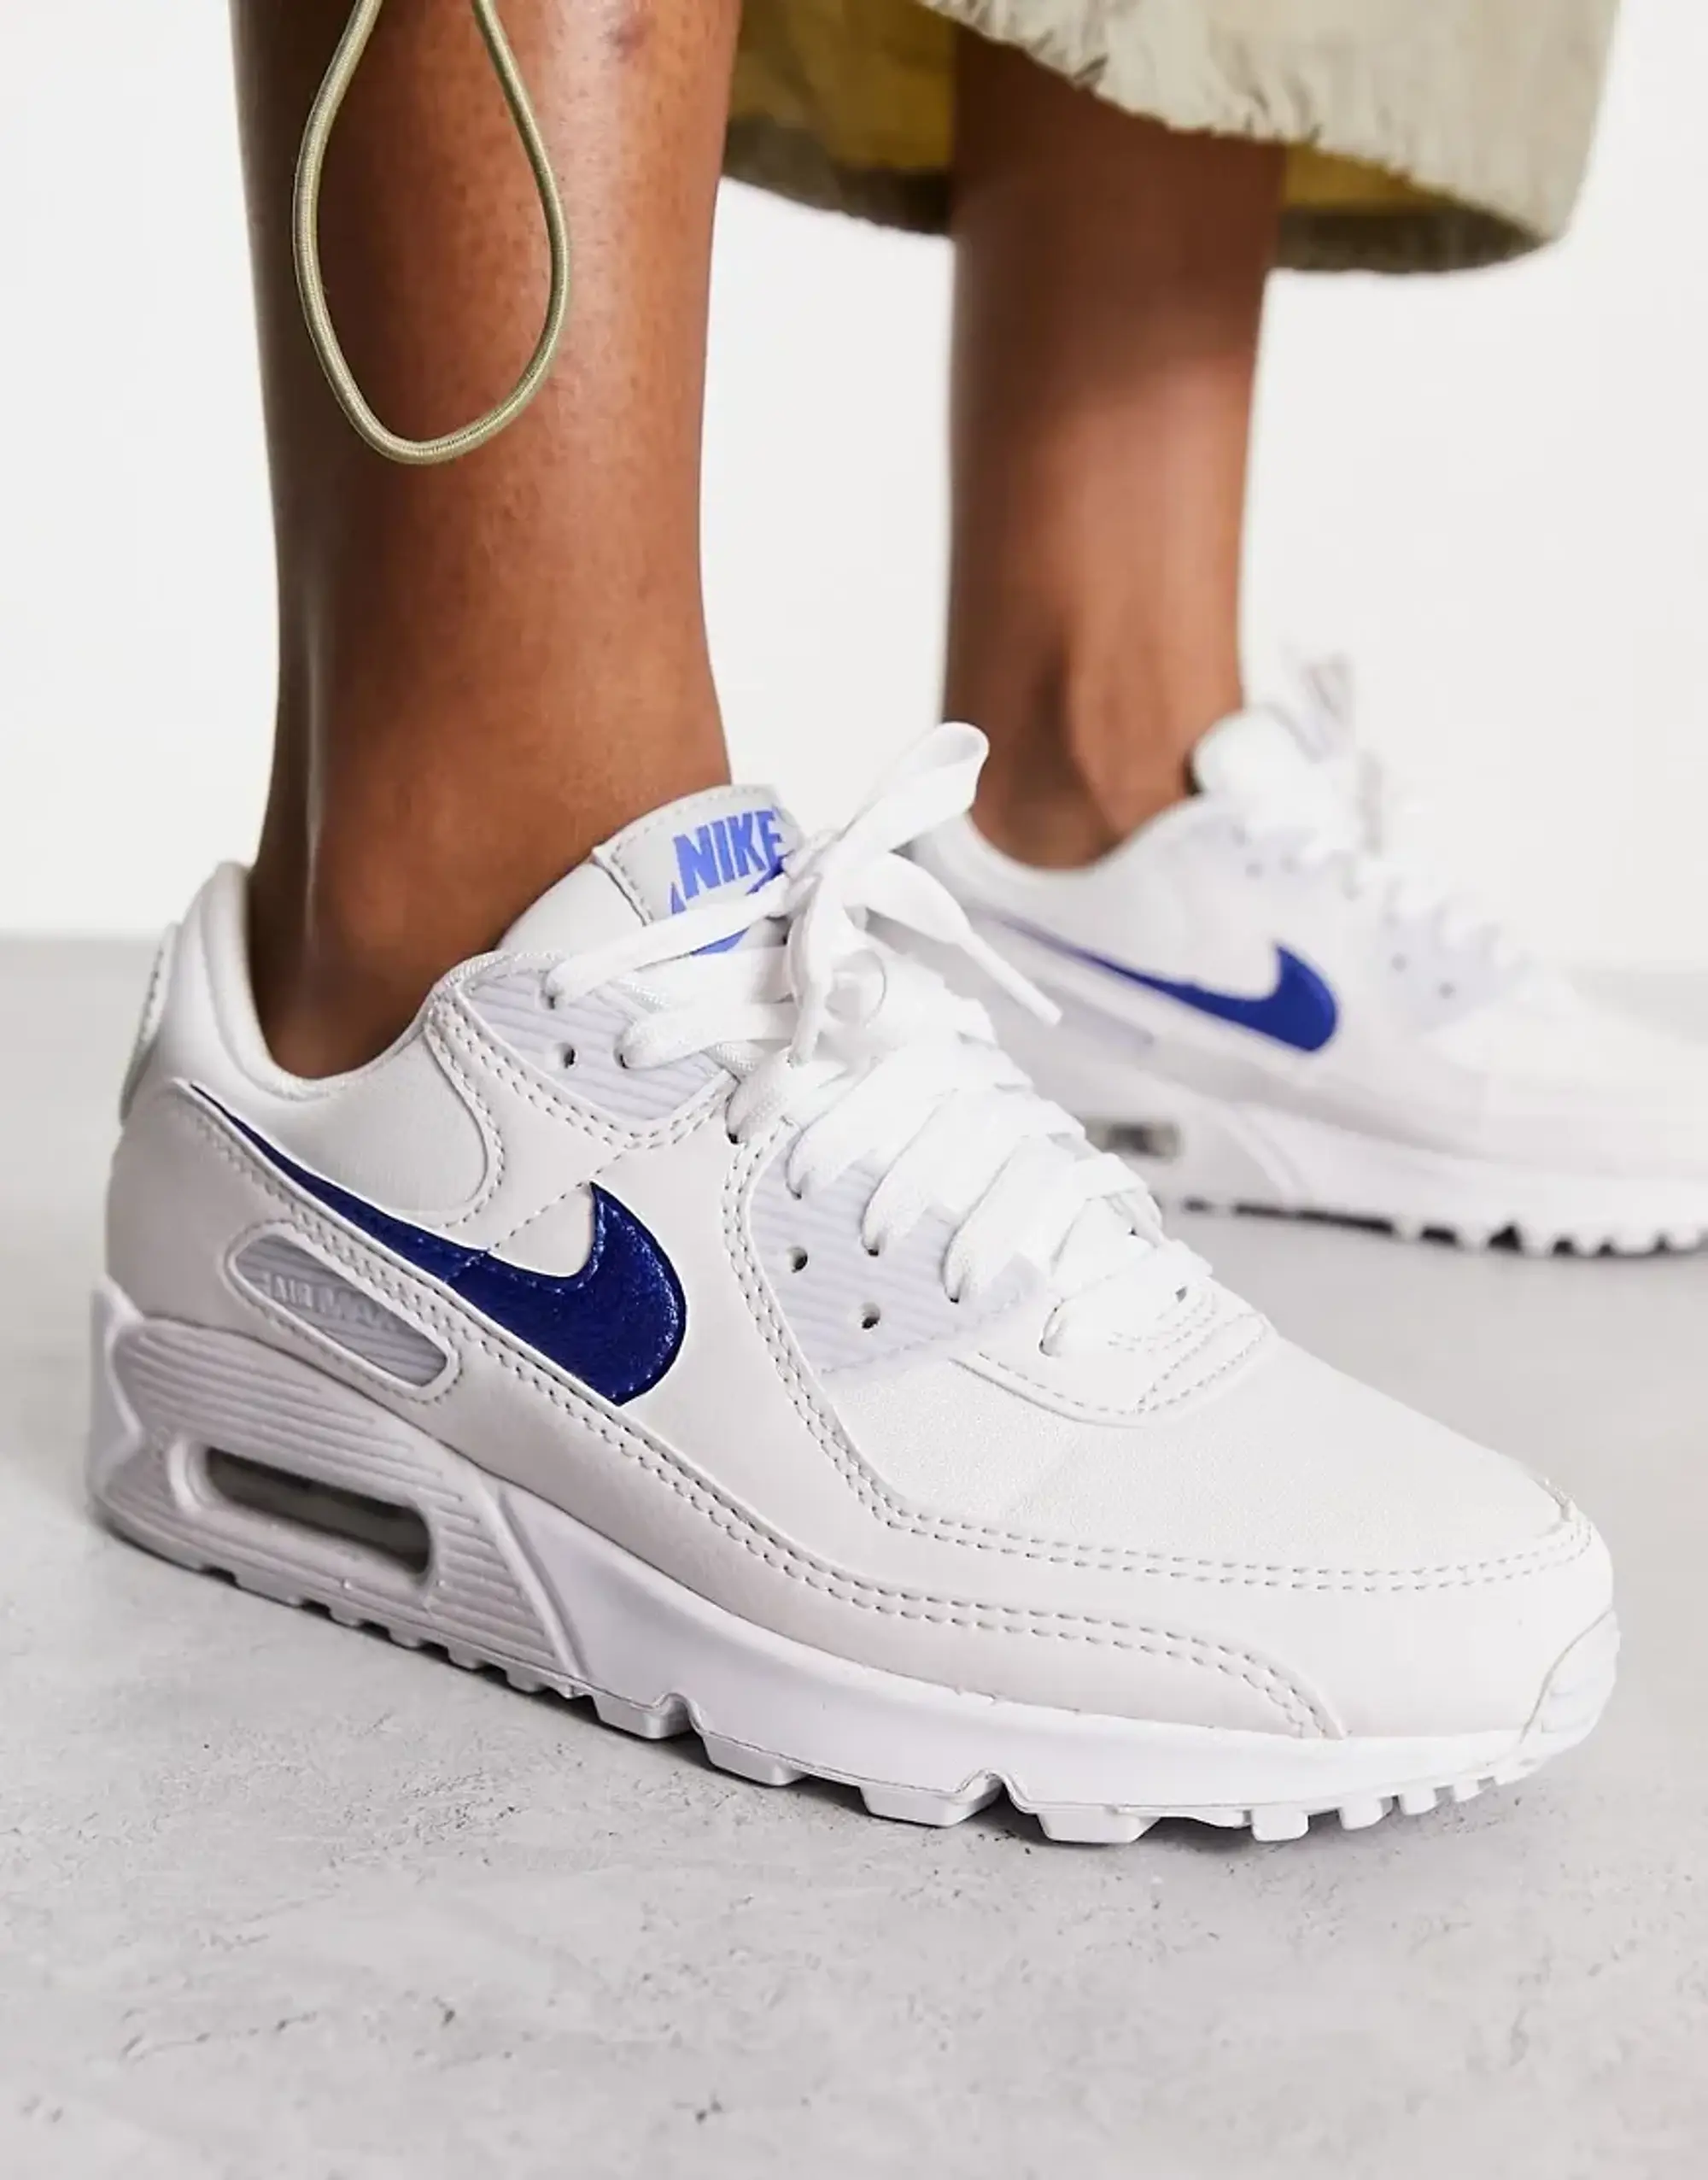 Nike Air Max 90 Trainers In White And Blue